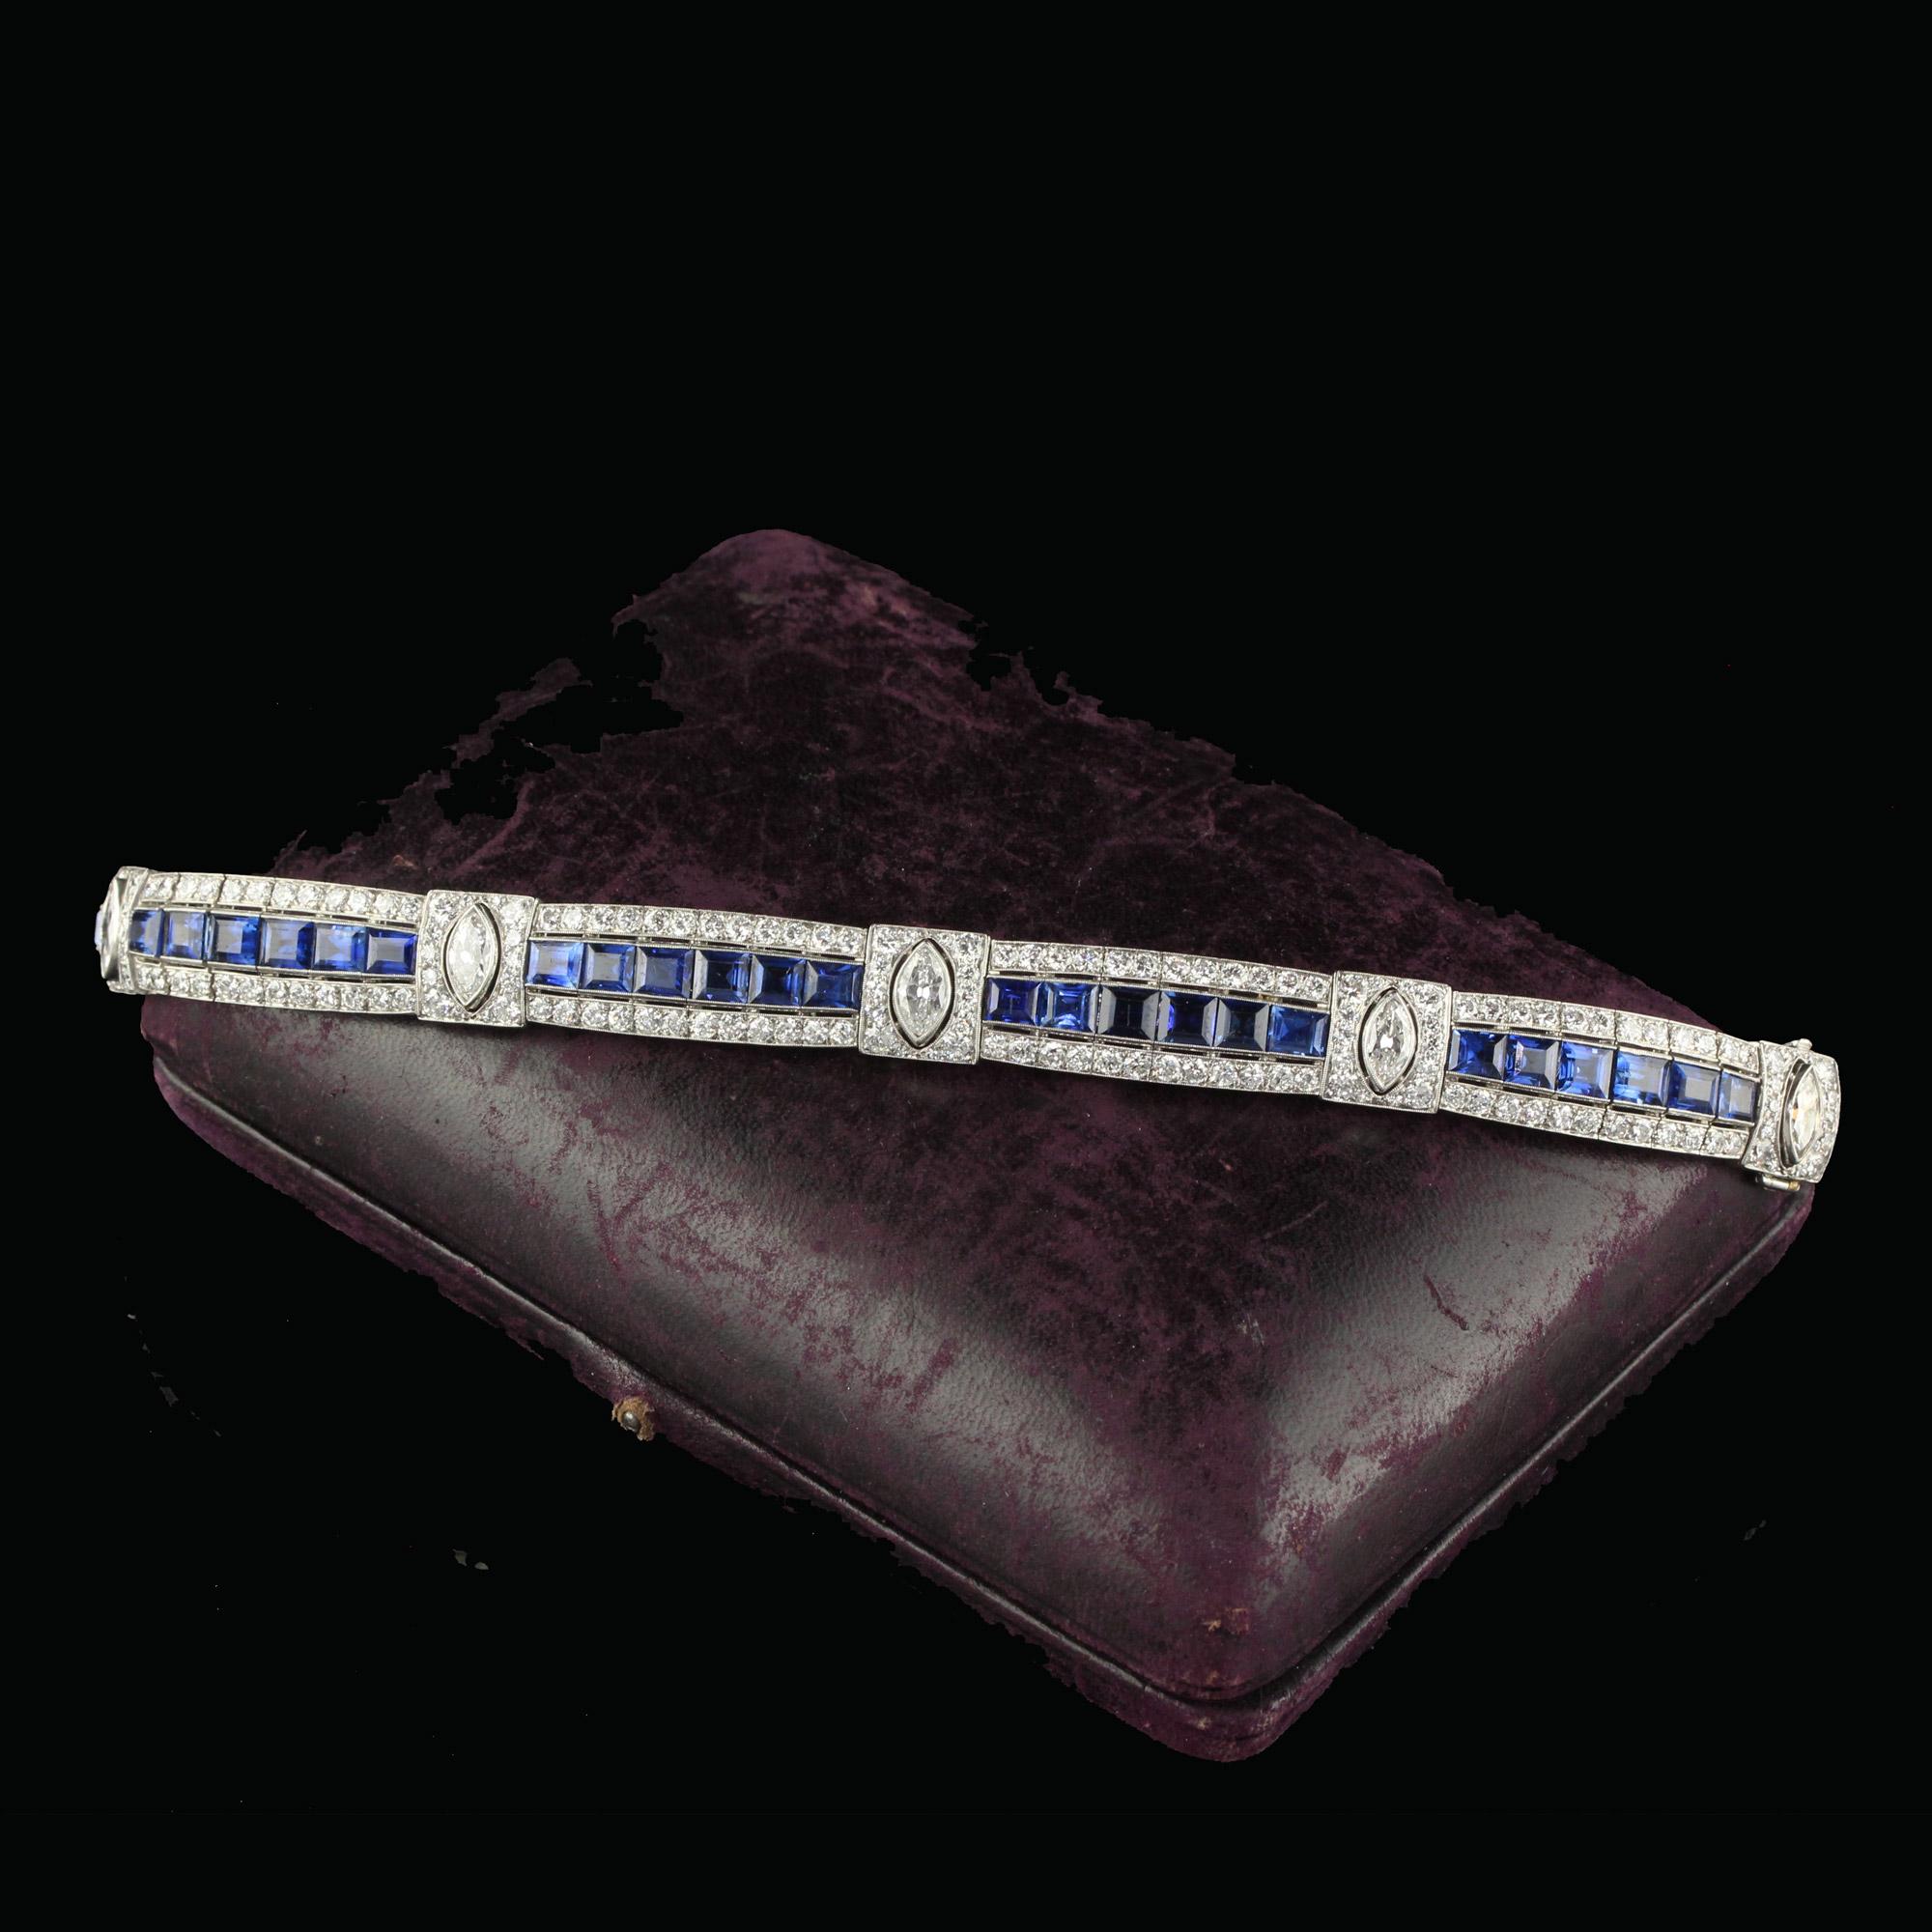 Beautiful Antique Art Deco Platinum Old European Diamond Marquise and Natural Sapphire Bracelet. This amazing Art Deco bracelet is crafted in platinum. There are natural old European cut and Marquise cut diamonds on top of the bracelet with large